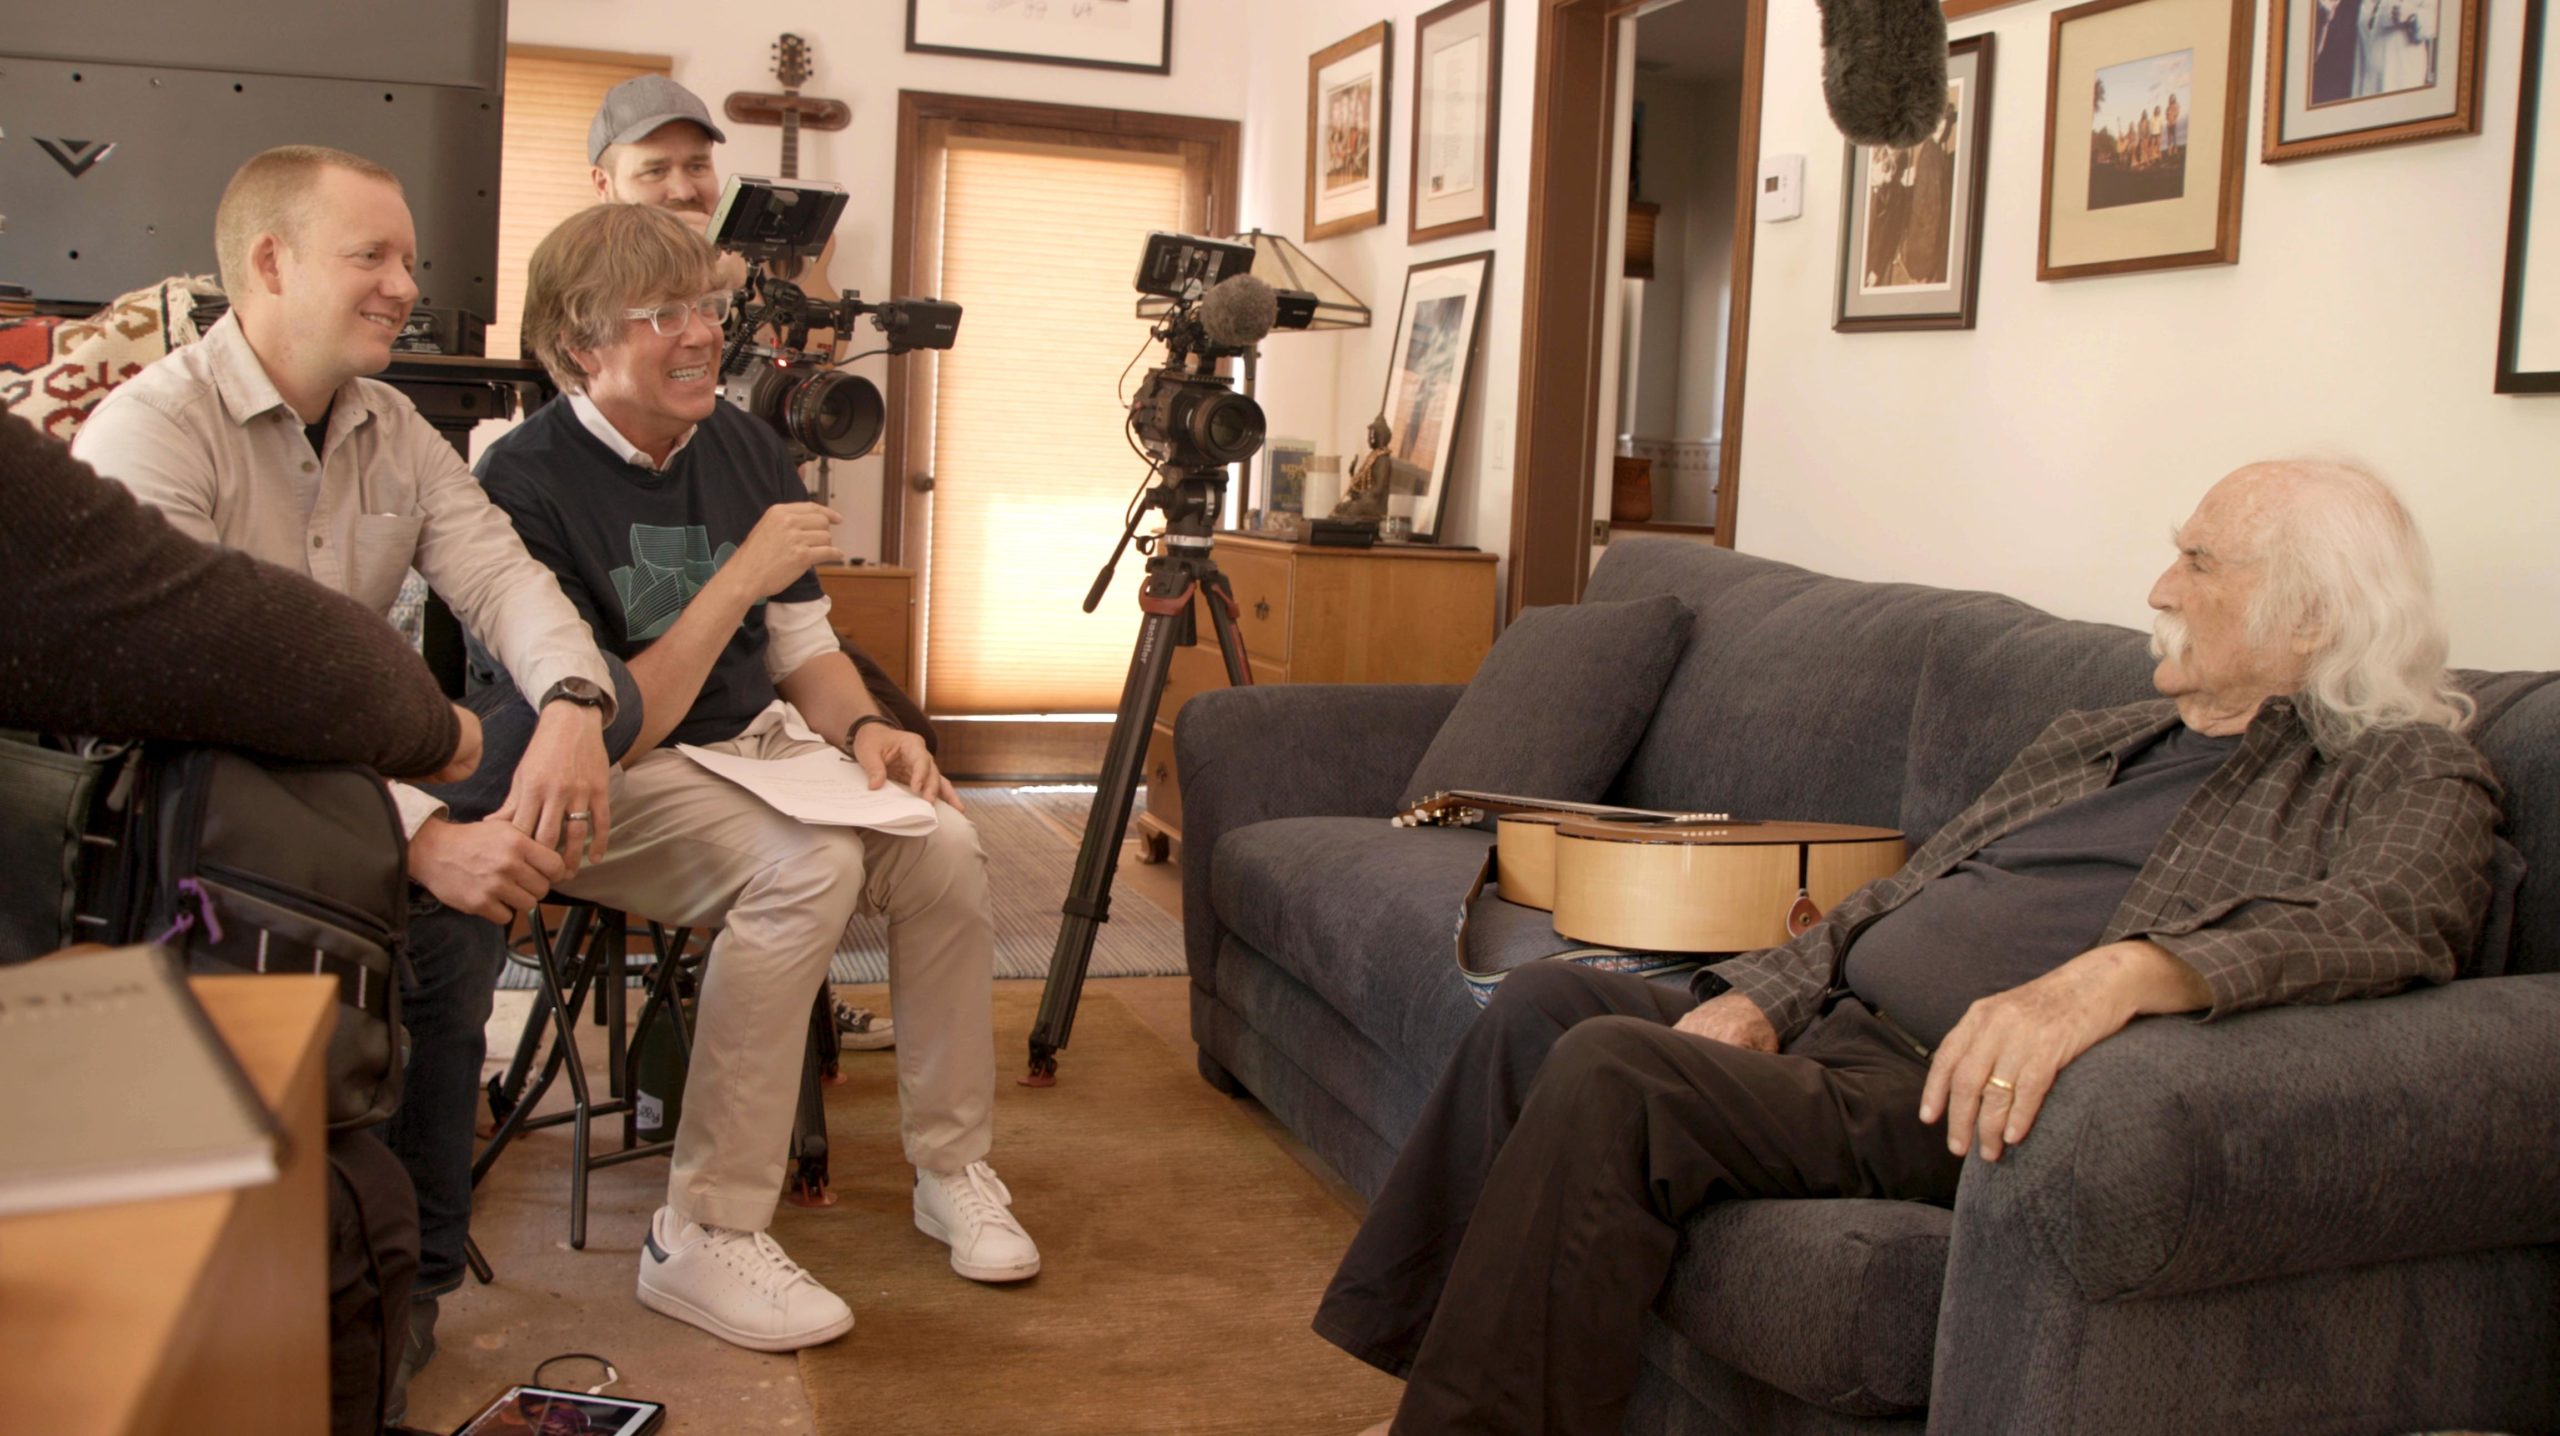 Mischa Hedges and Brendan Hedges Interview David Crosby for Oracle Documentary (Photo Credit: Jeremy Belanger)